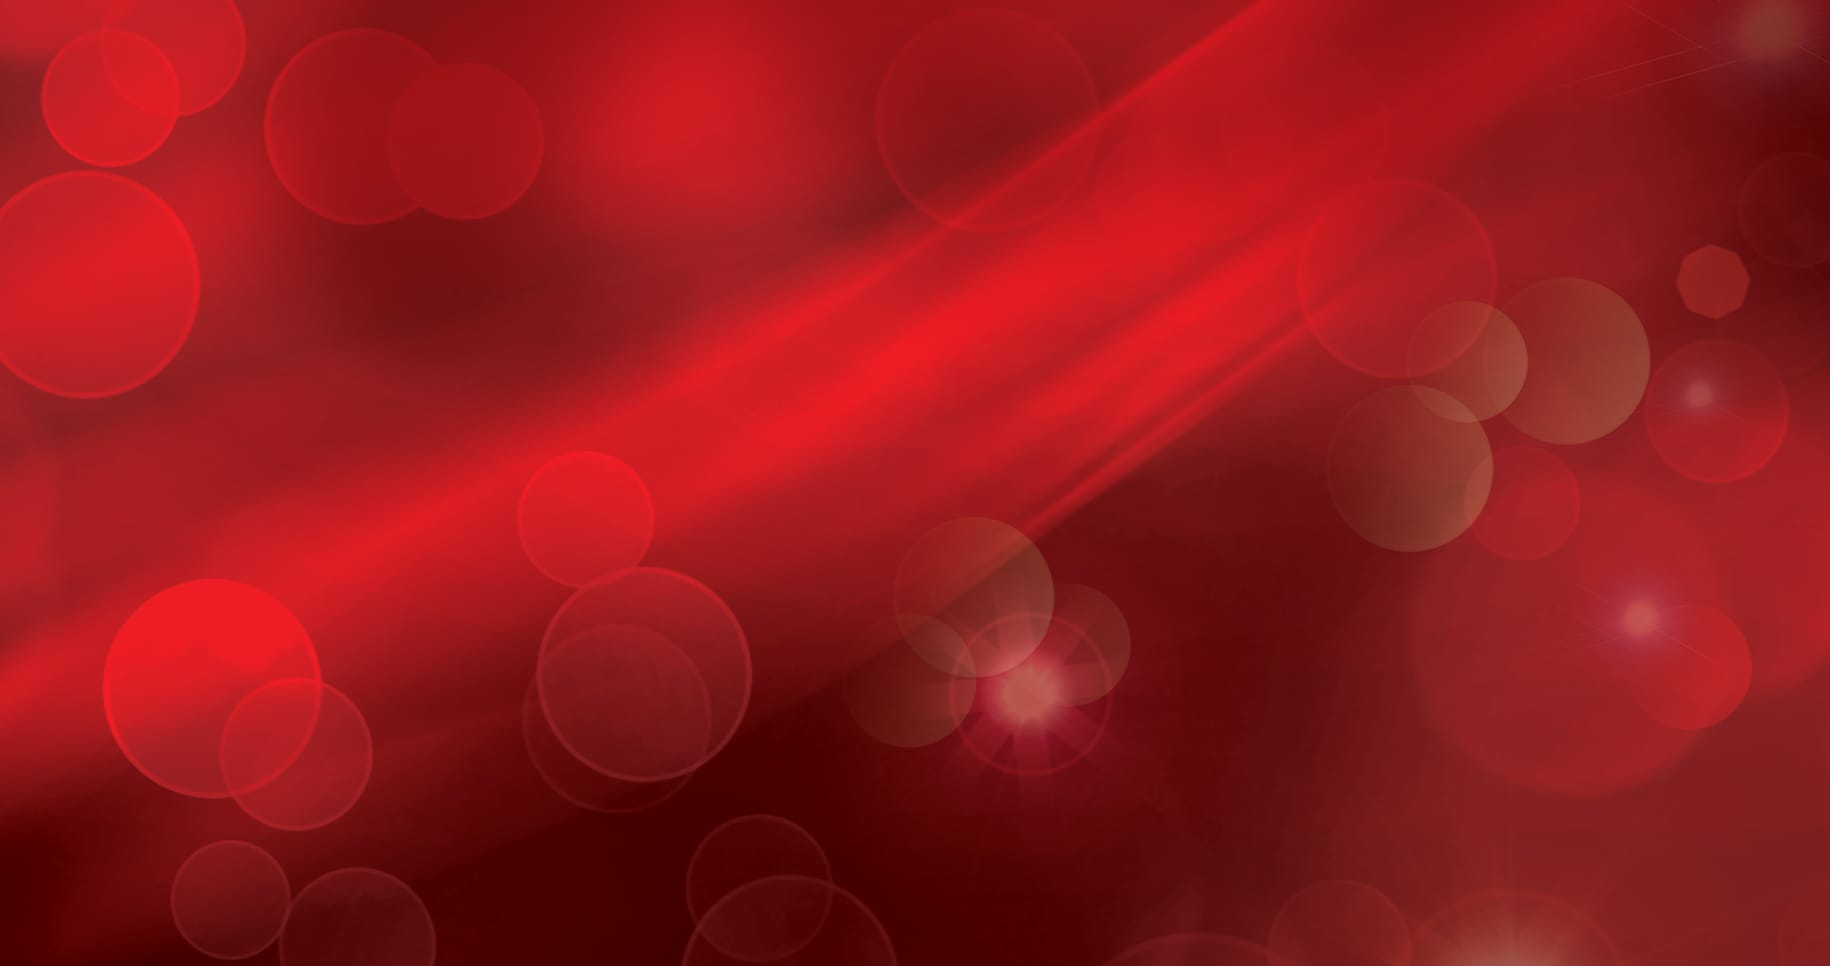 Abstract red image